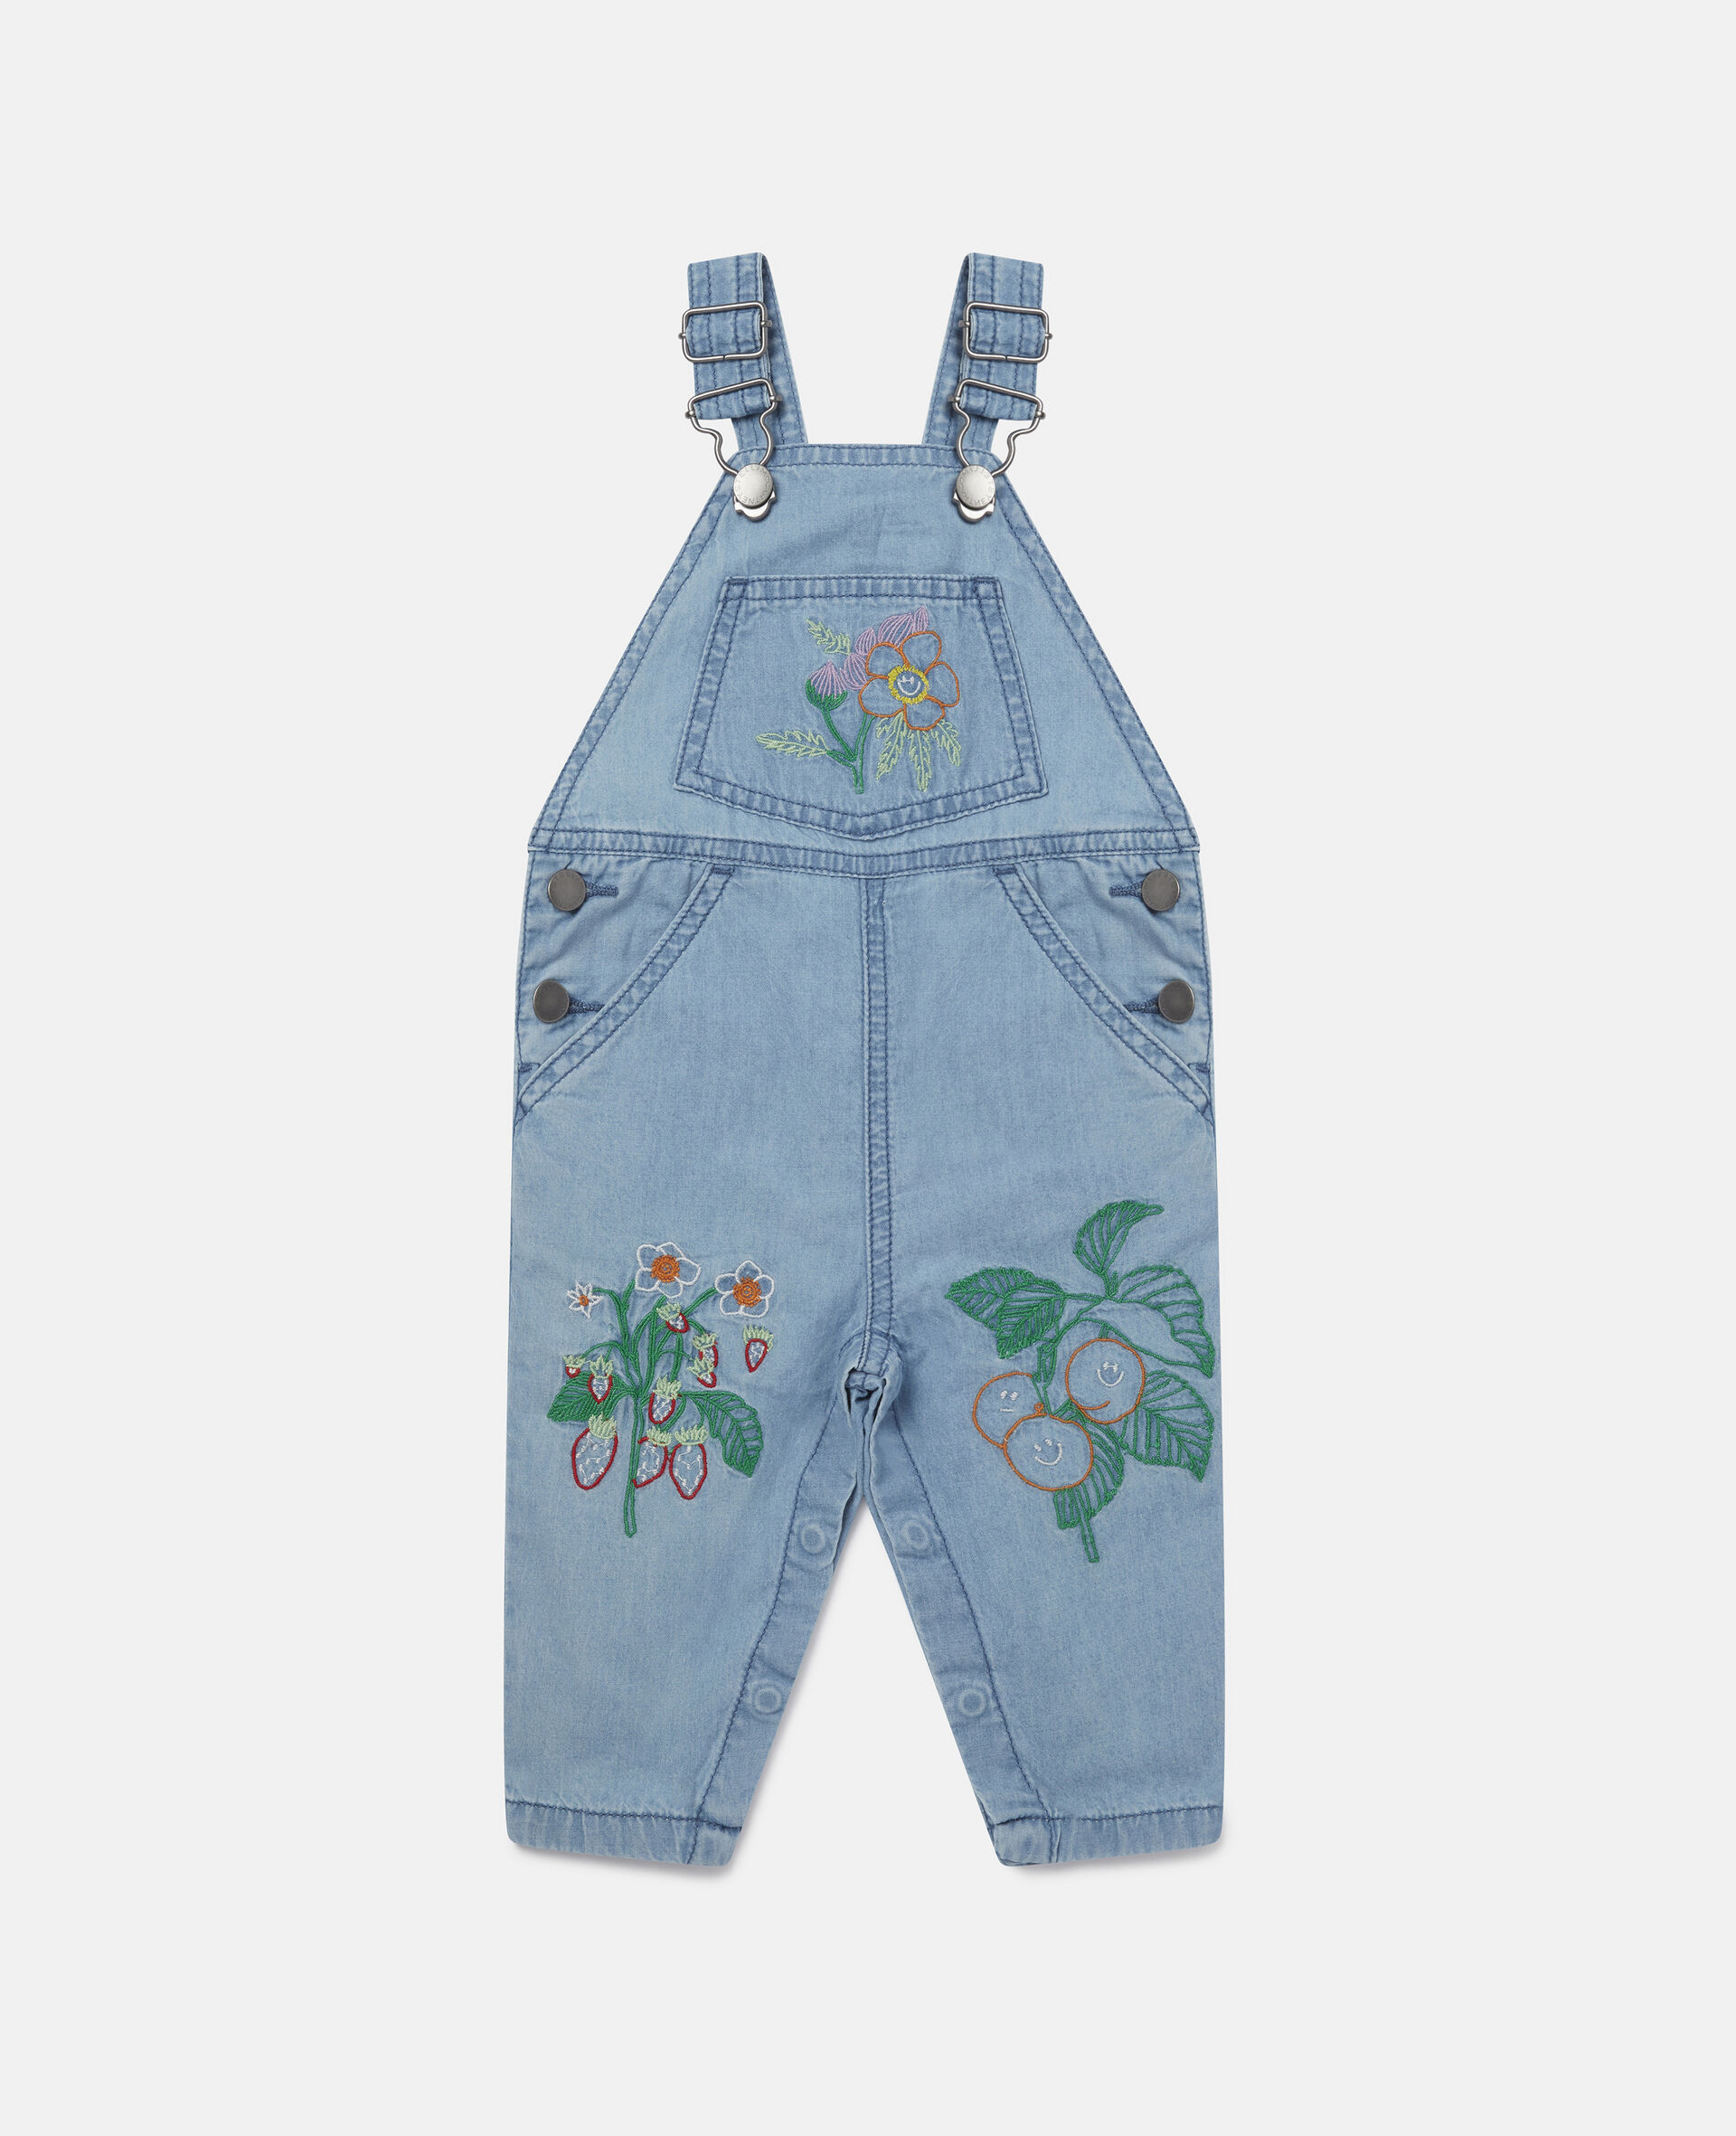 Chambray Embroidered Dungaree-Blue-large image number 0